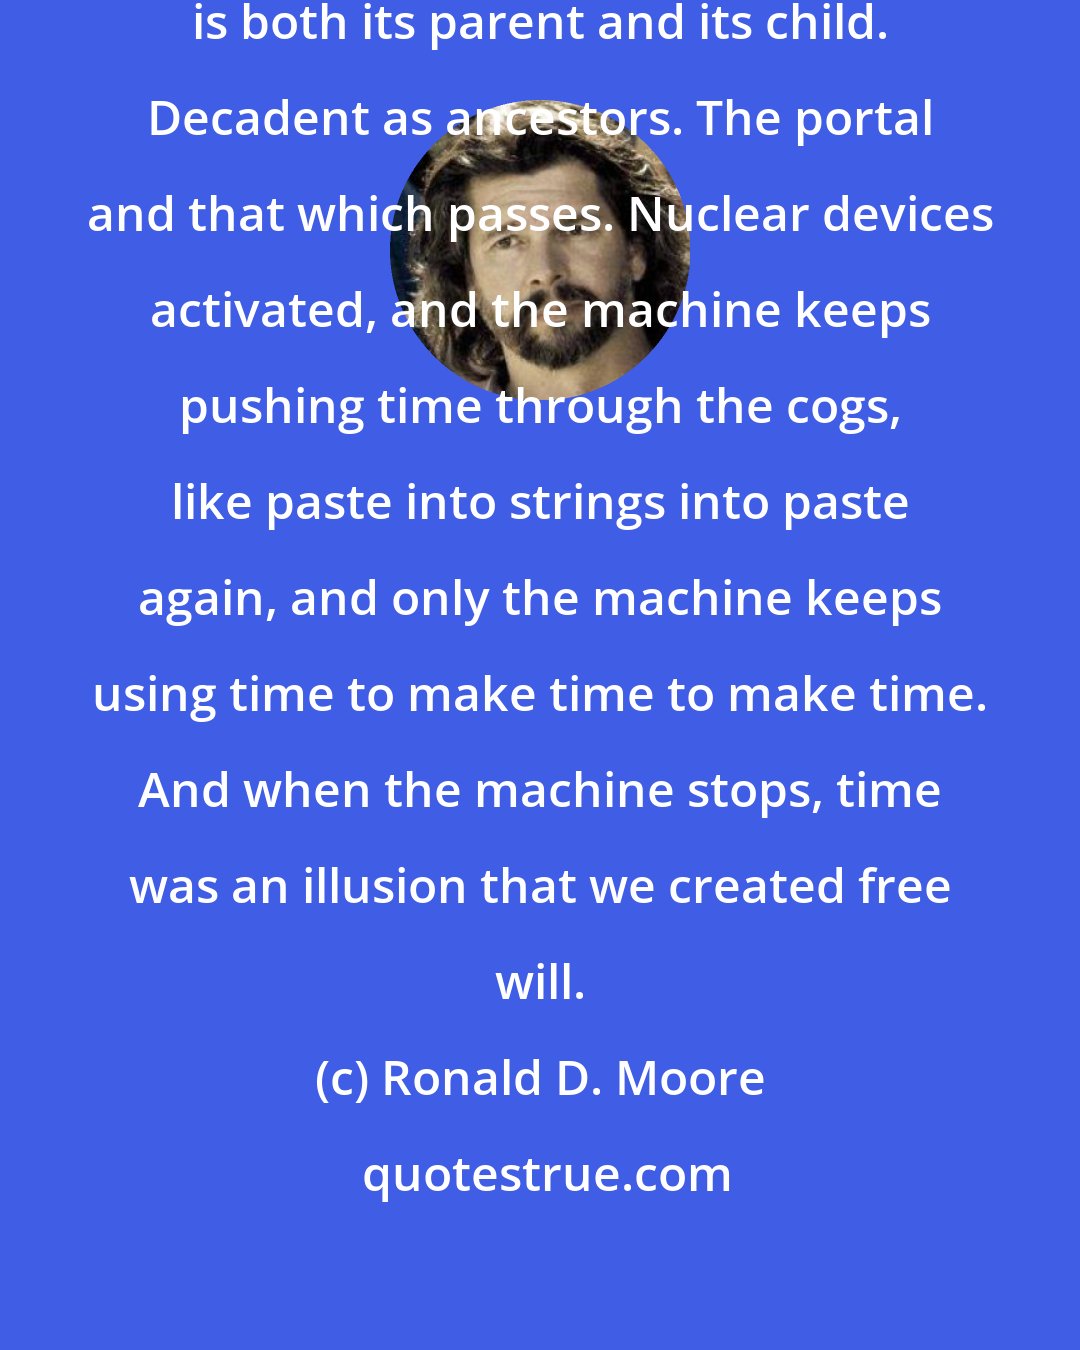 Ronald D. Moore: The flower inside the fruit that is both its parent and its child. Decadent as ancestors. The portal and that which passes. Nuclear devices activated, and the machine keeps pushing time through the cogs, like paste into strings into paste again, and only the machine keeps using time to make time to make time. And when the machine stops, time was an illusion that we created free will.